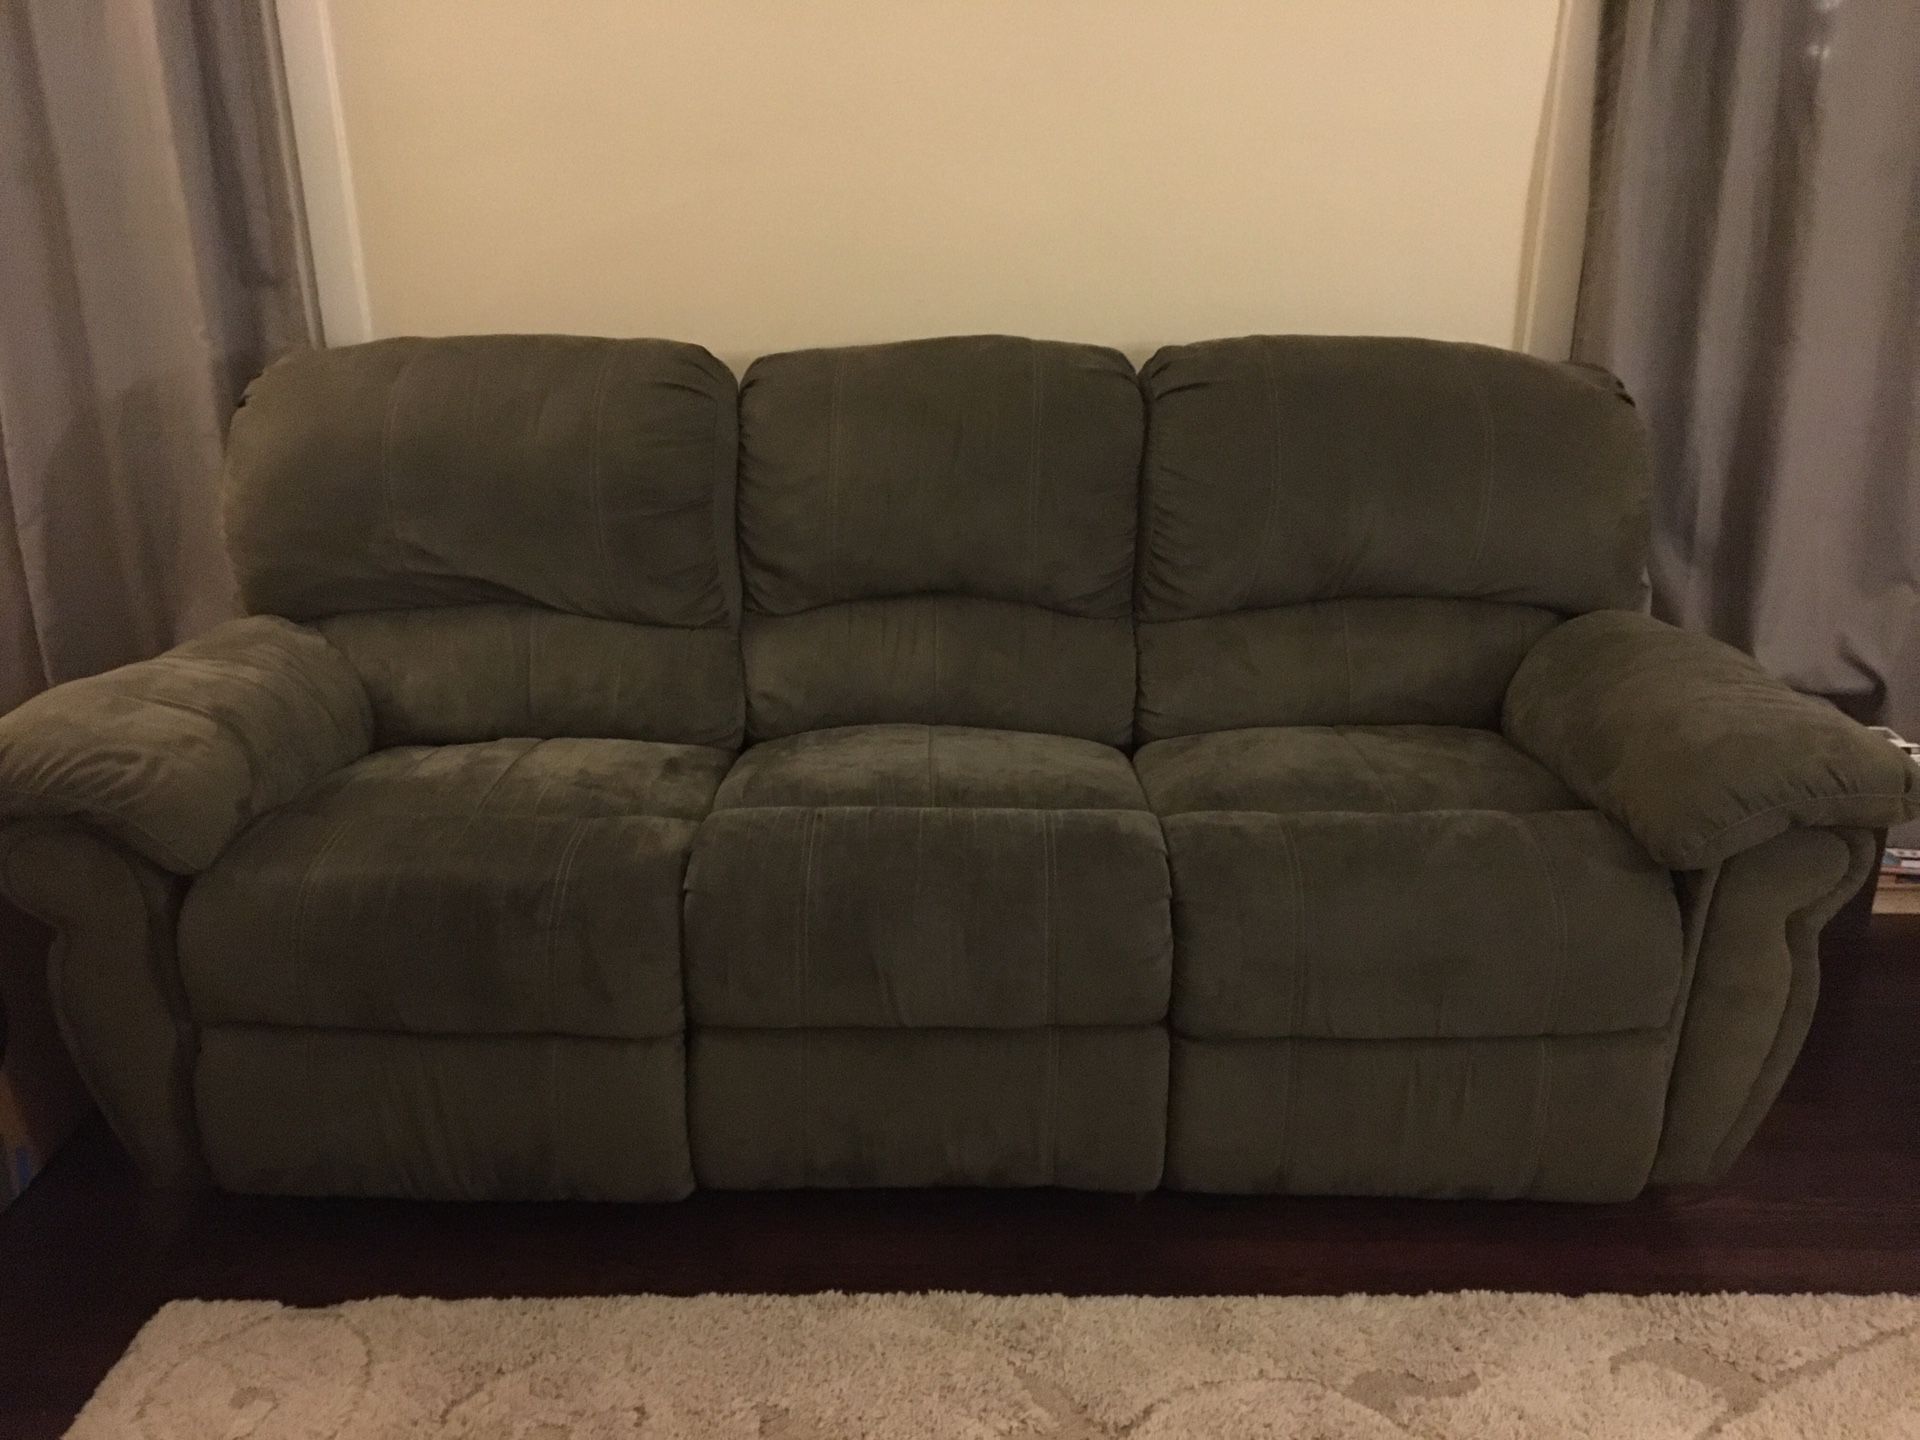 Two free couches